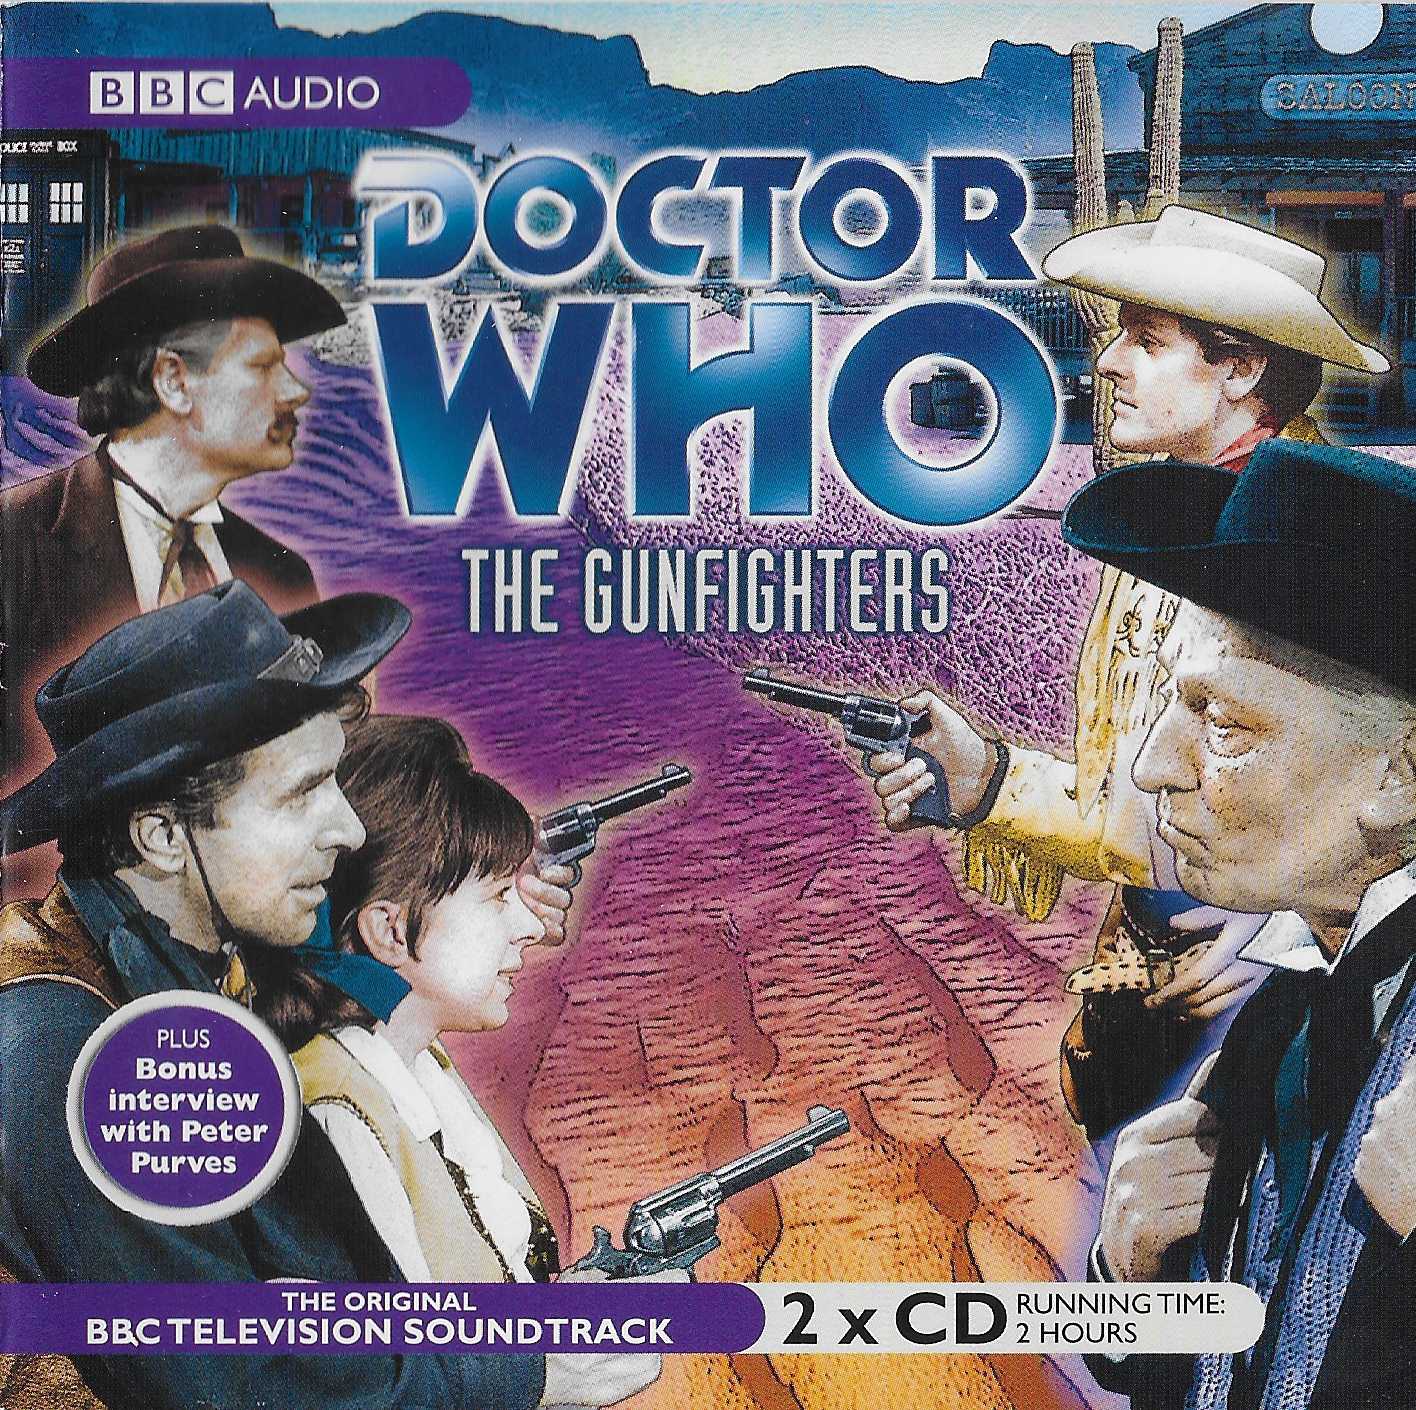 Picture of ISBN 978-1-4056-7691-5 Doctor Who - The gunfighters by artist Donald Cottom from the BBC cds - Records and Tapes library